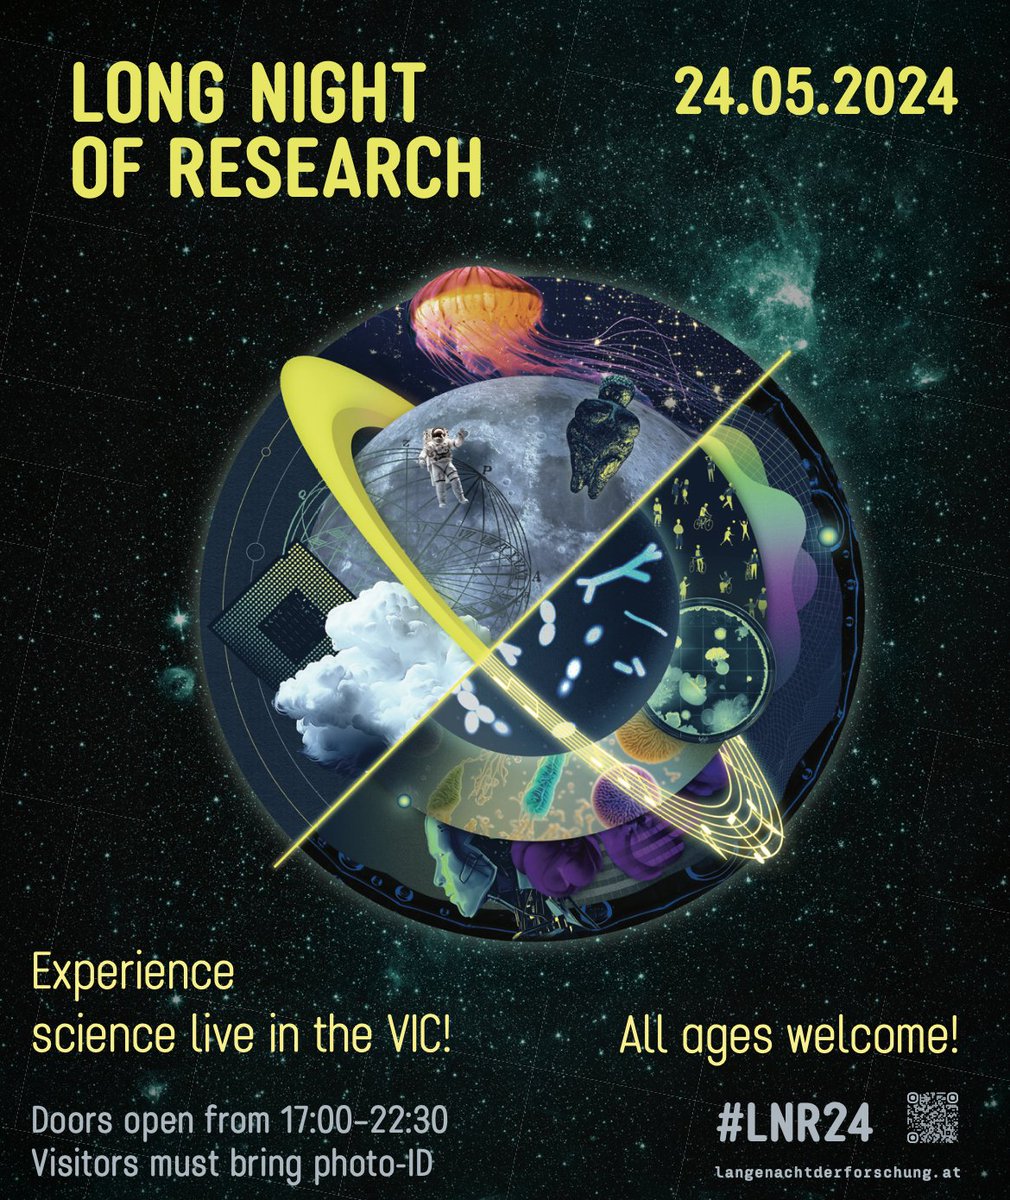 ✨ Join us at Austria's #LongNightofResearch! 🌙🔬 Explore how science fosters global peace at the Vienna International Centre. Engage with experts from the ICPDR, IAEA, CTBTO, IOM, UNIDO, UNODA, and UNODC.

🗓️ 24.05.2024, 17-23:00
📍 Vienna International Centre
🔑 Bring photo ID